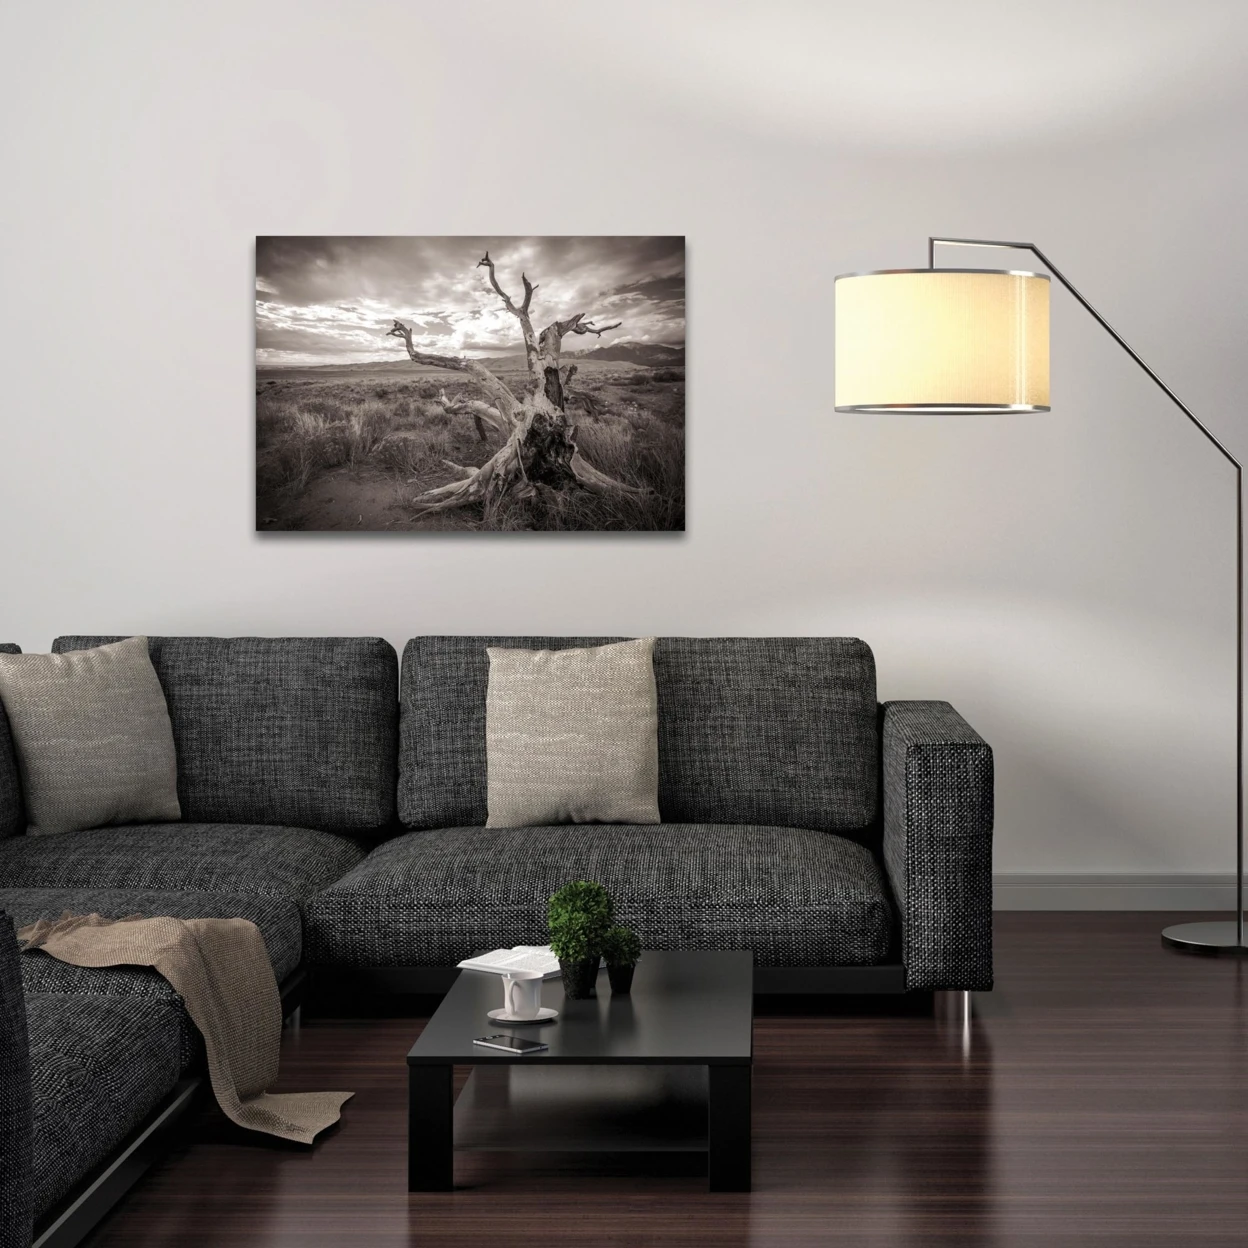 Knotty Valley by Meirav Levy - Film Noir Wall Art on Metal (1)